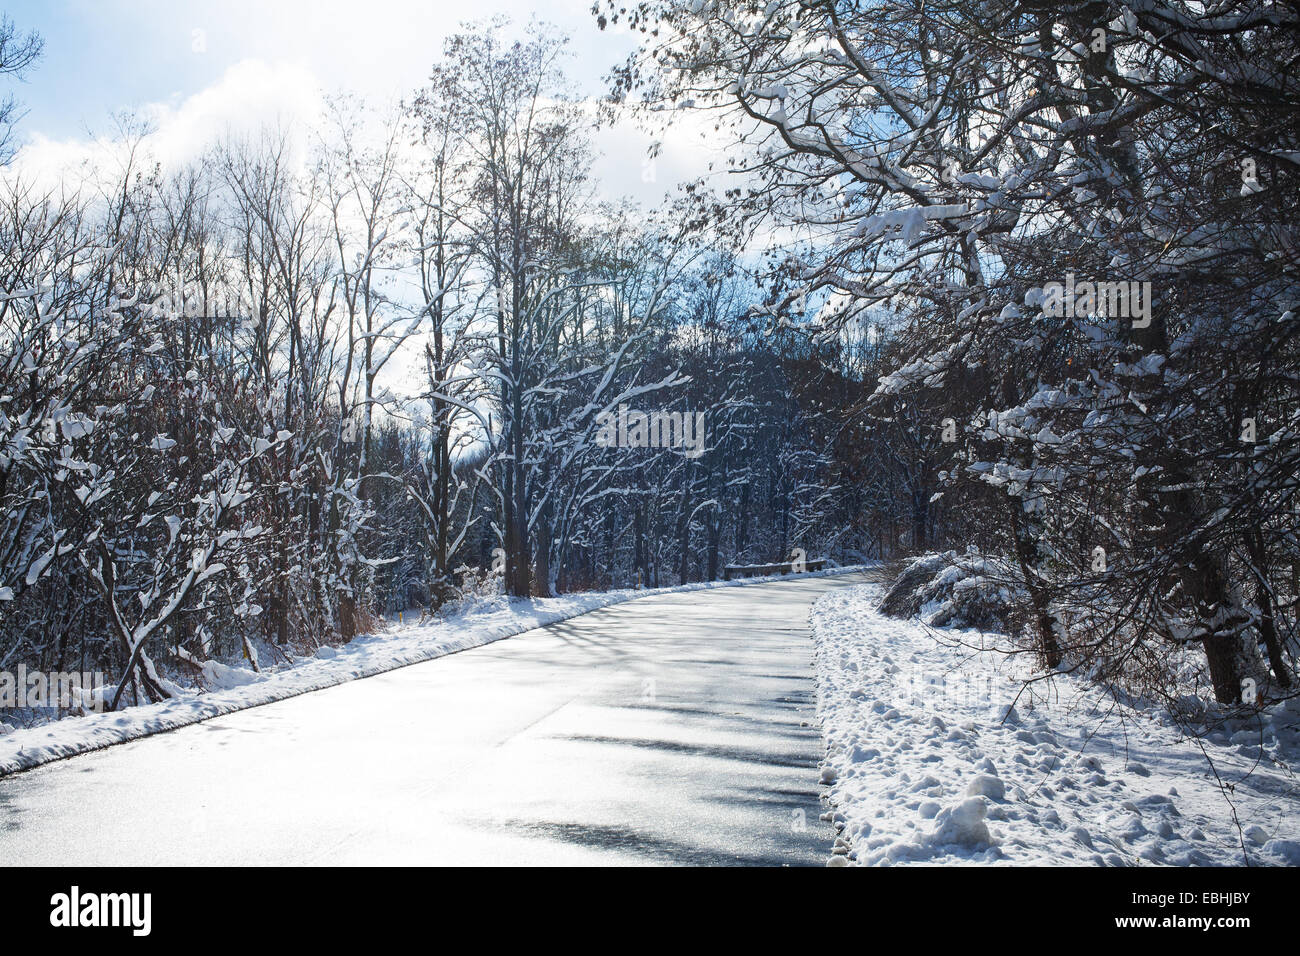 The winter sun glares on the black top road through a snowy rural section of the Berkshires in Massachusetts. Stock Photo